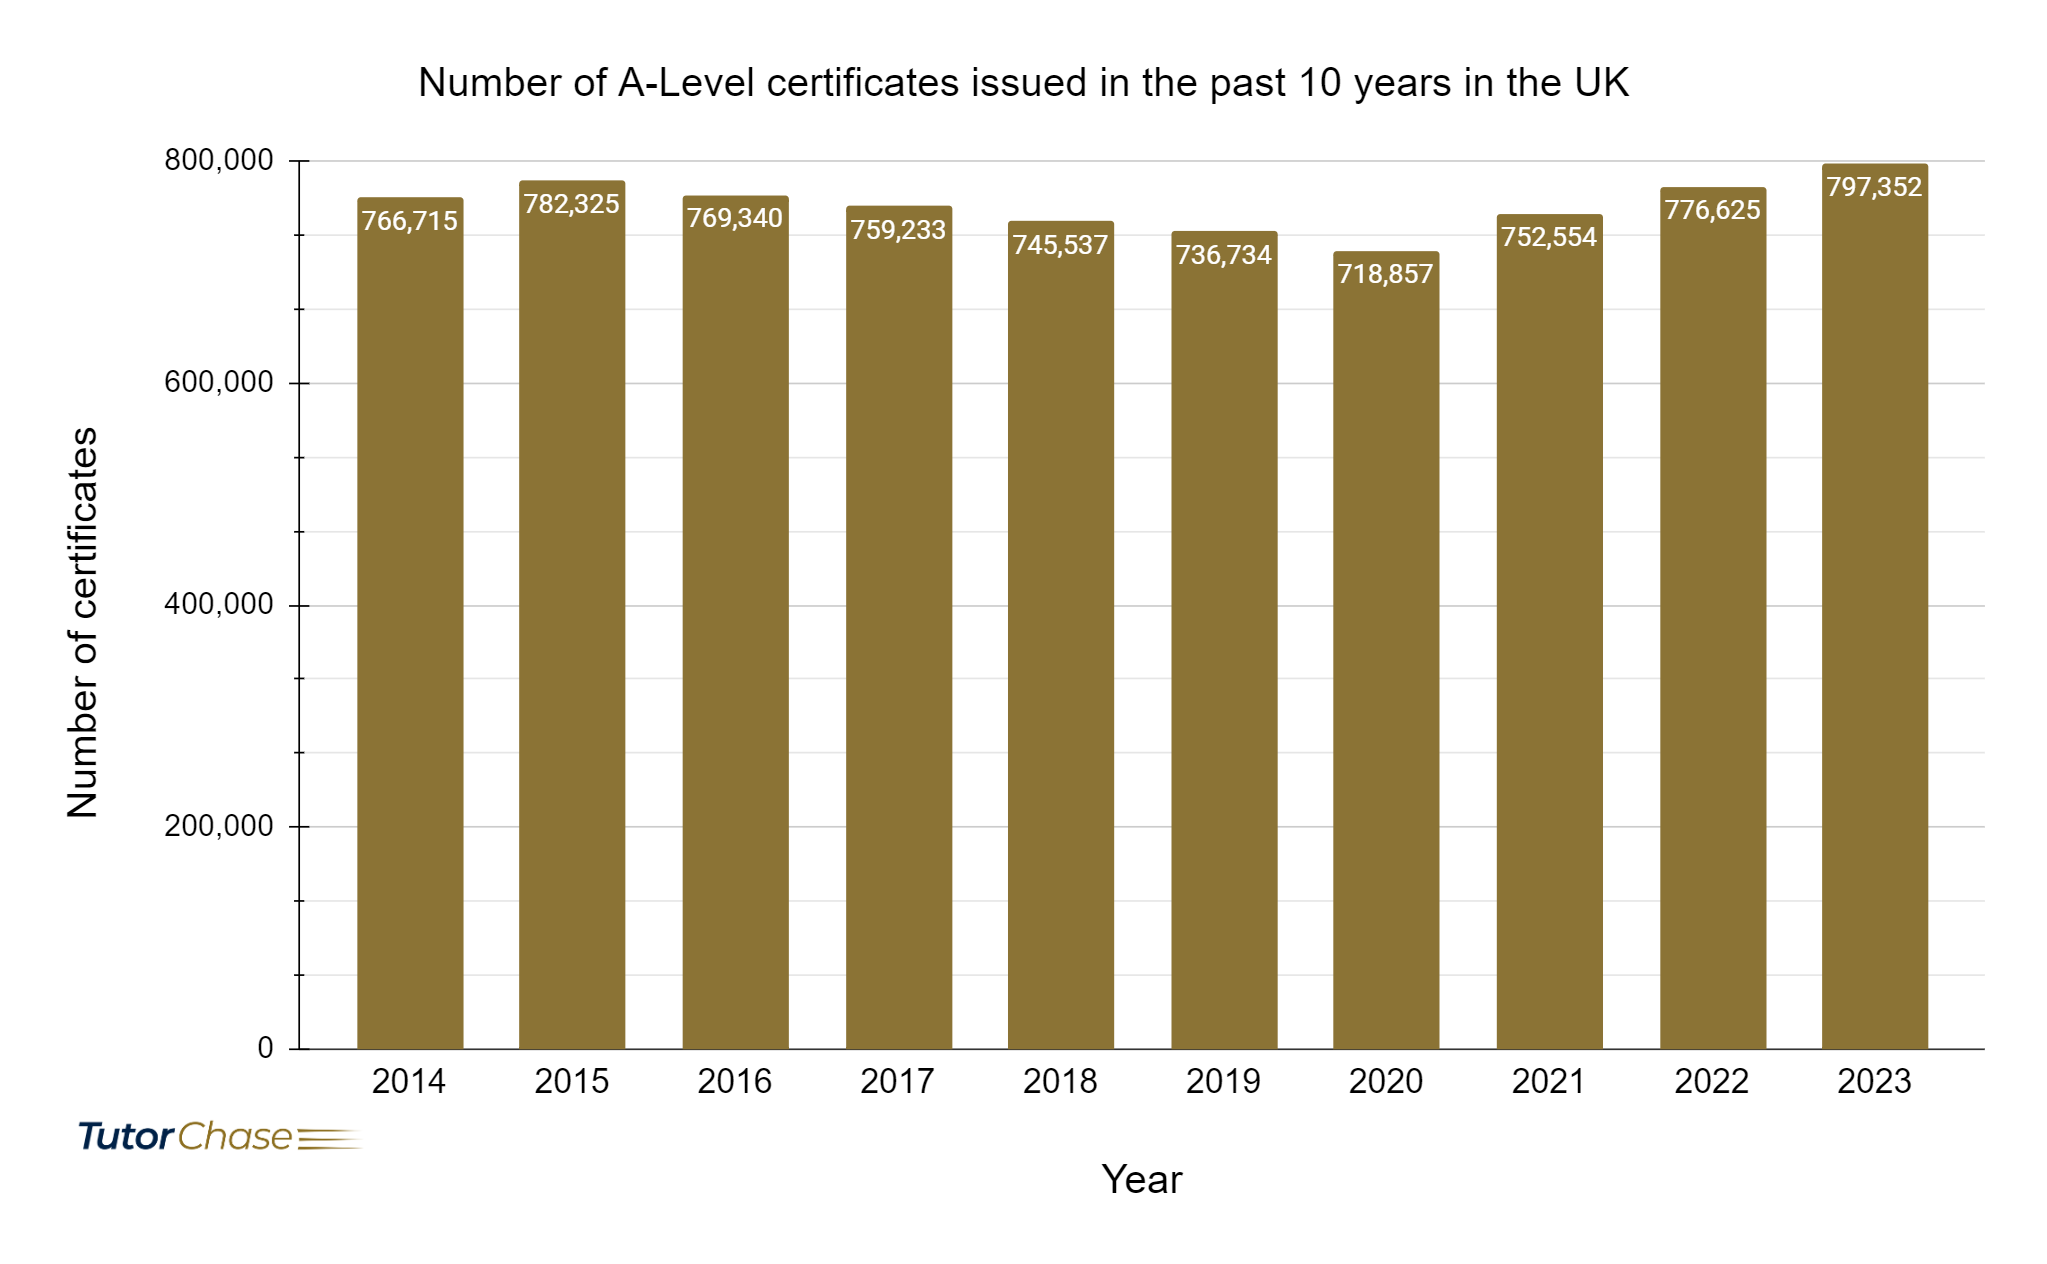 Number of A-Level certificates issued in the past 10 years in the UK